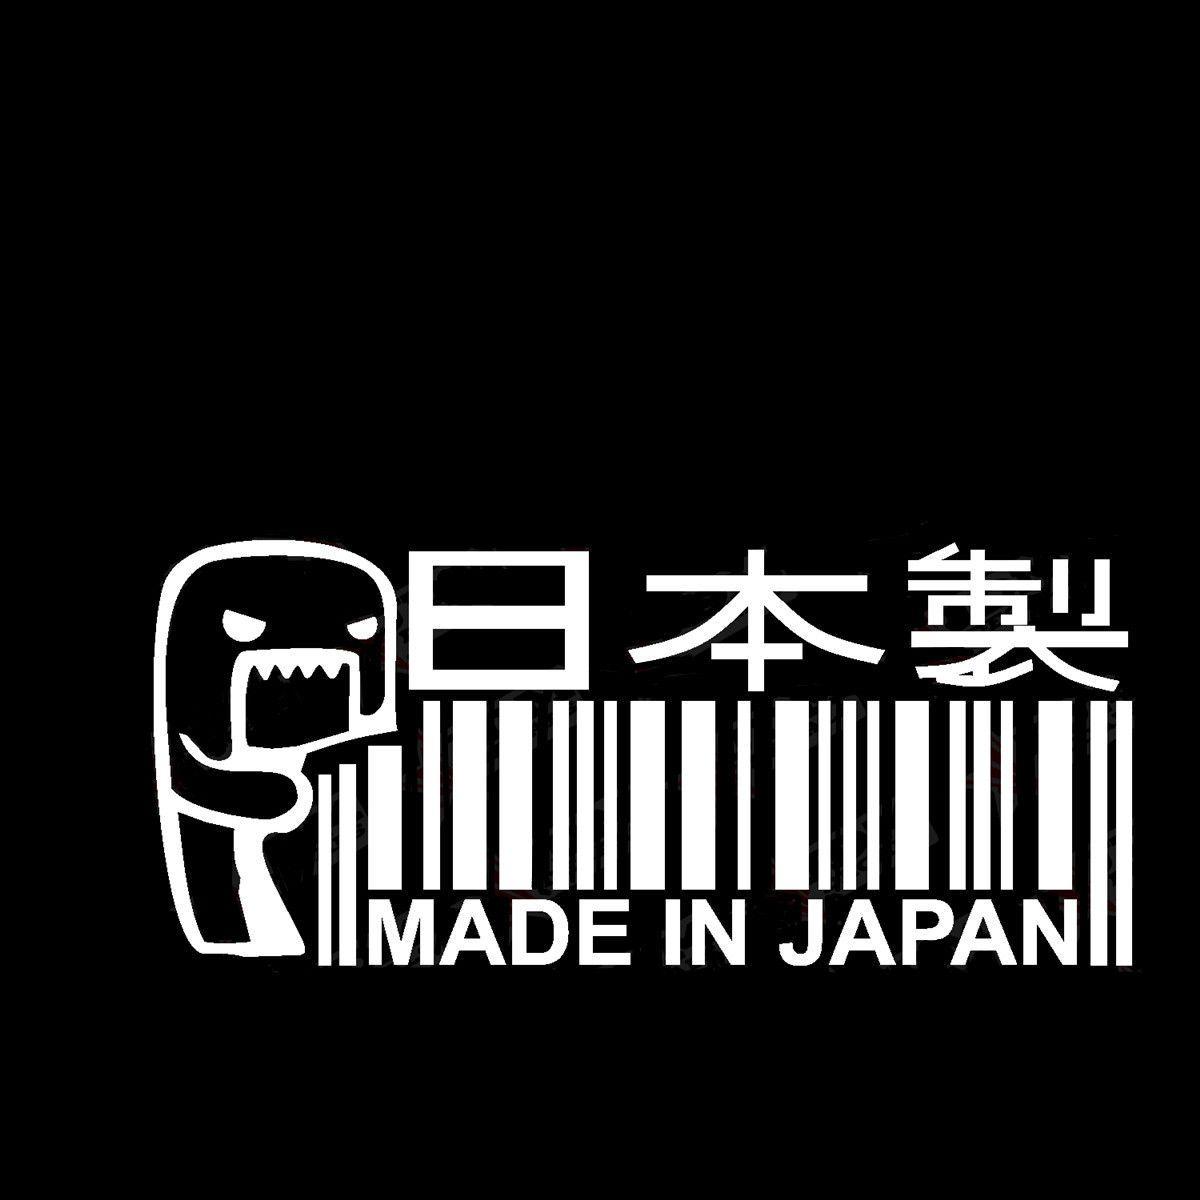 Car Stying Made In Japan Barcode Turbo Decal Funny Car Vinyl Sticker